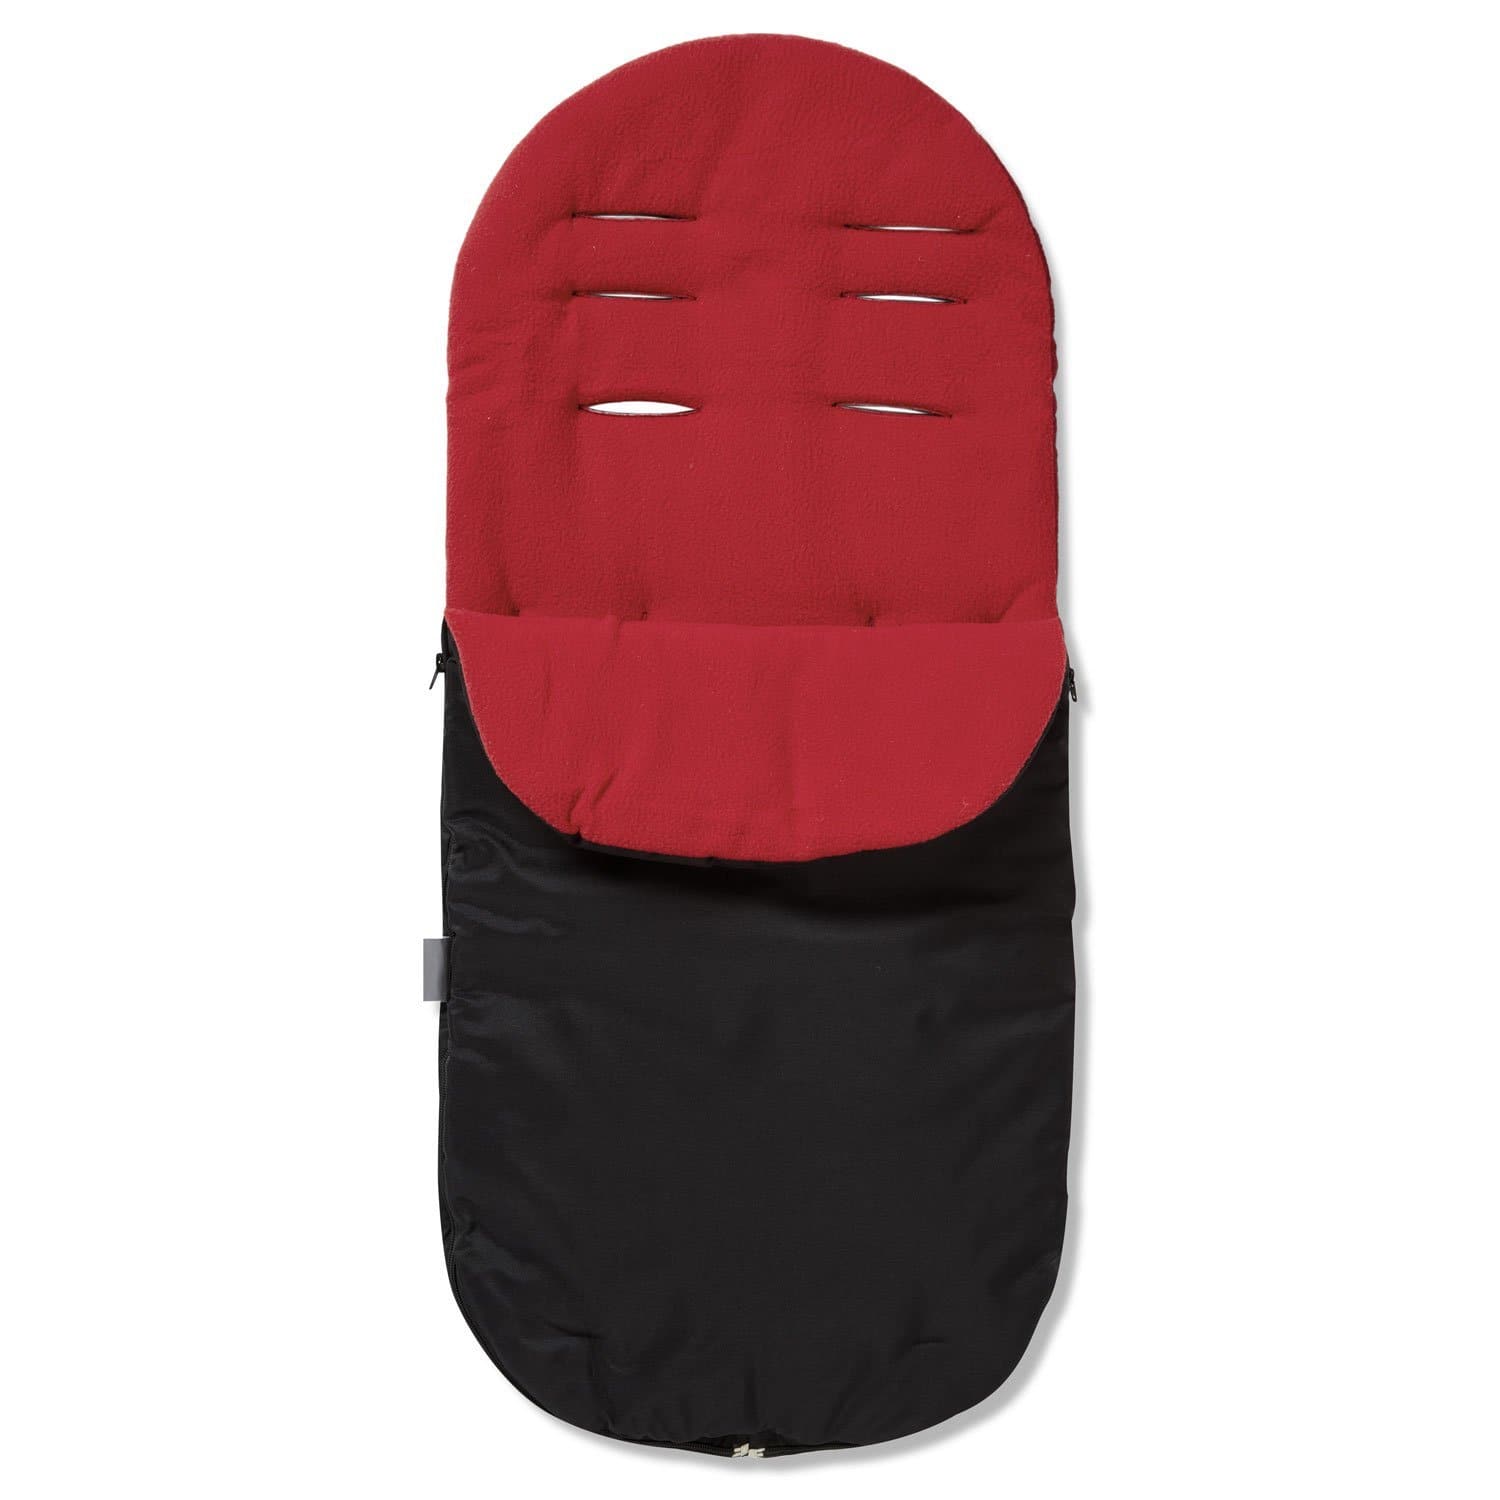 Footmuff / Cosy Toes Compatible with Recaro - Red / Fits All Models | For Your Little One